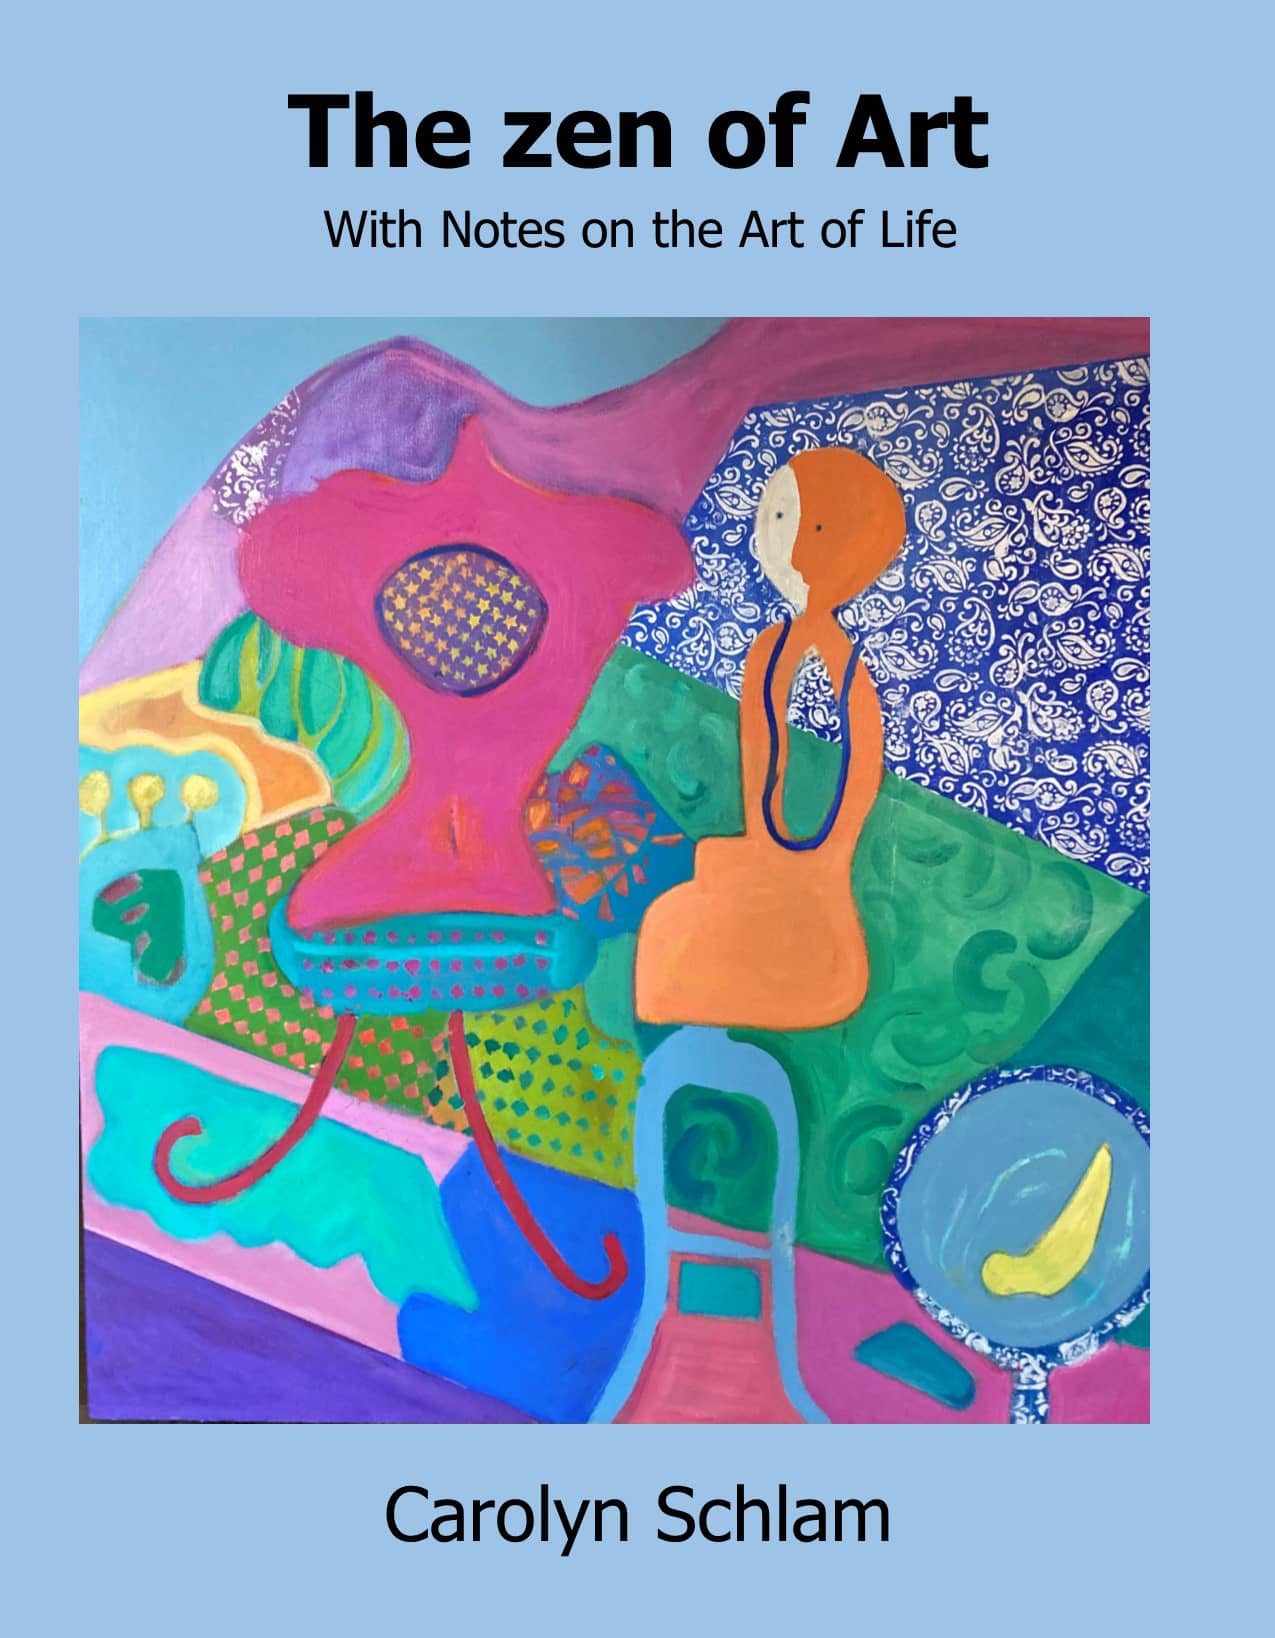 The zen of Art With Notes on the Art of Life